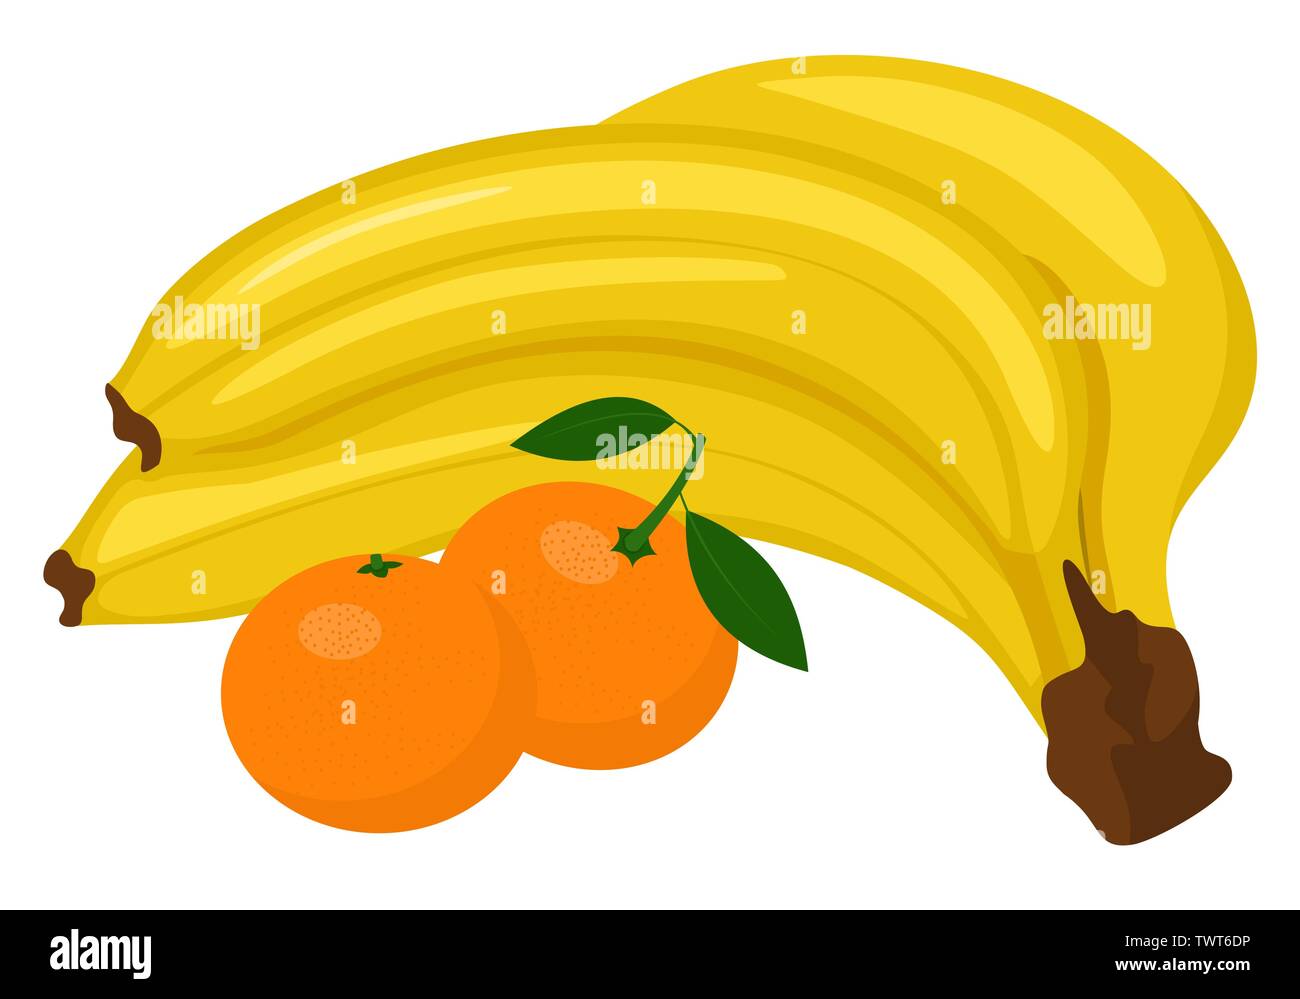 Bunch of bananas and Tangerine or clementine with green leaf isolated on white background. Vector illustration Stock Vector